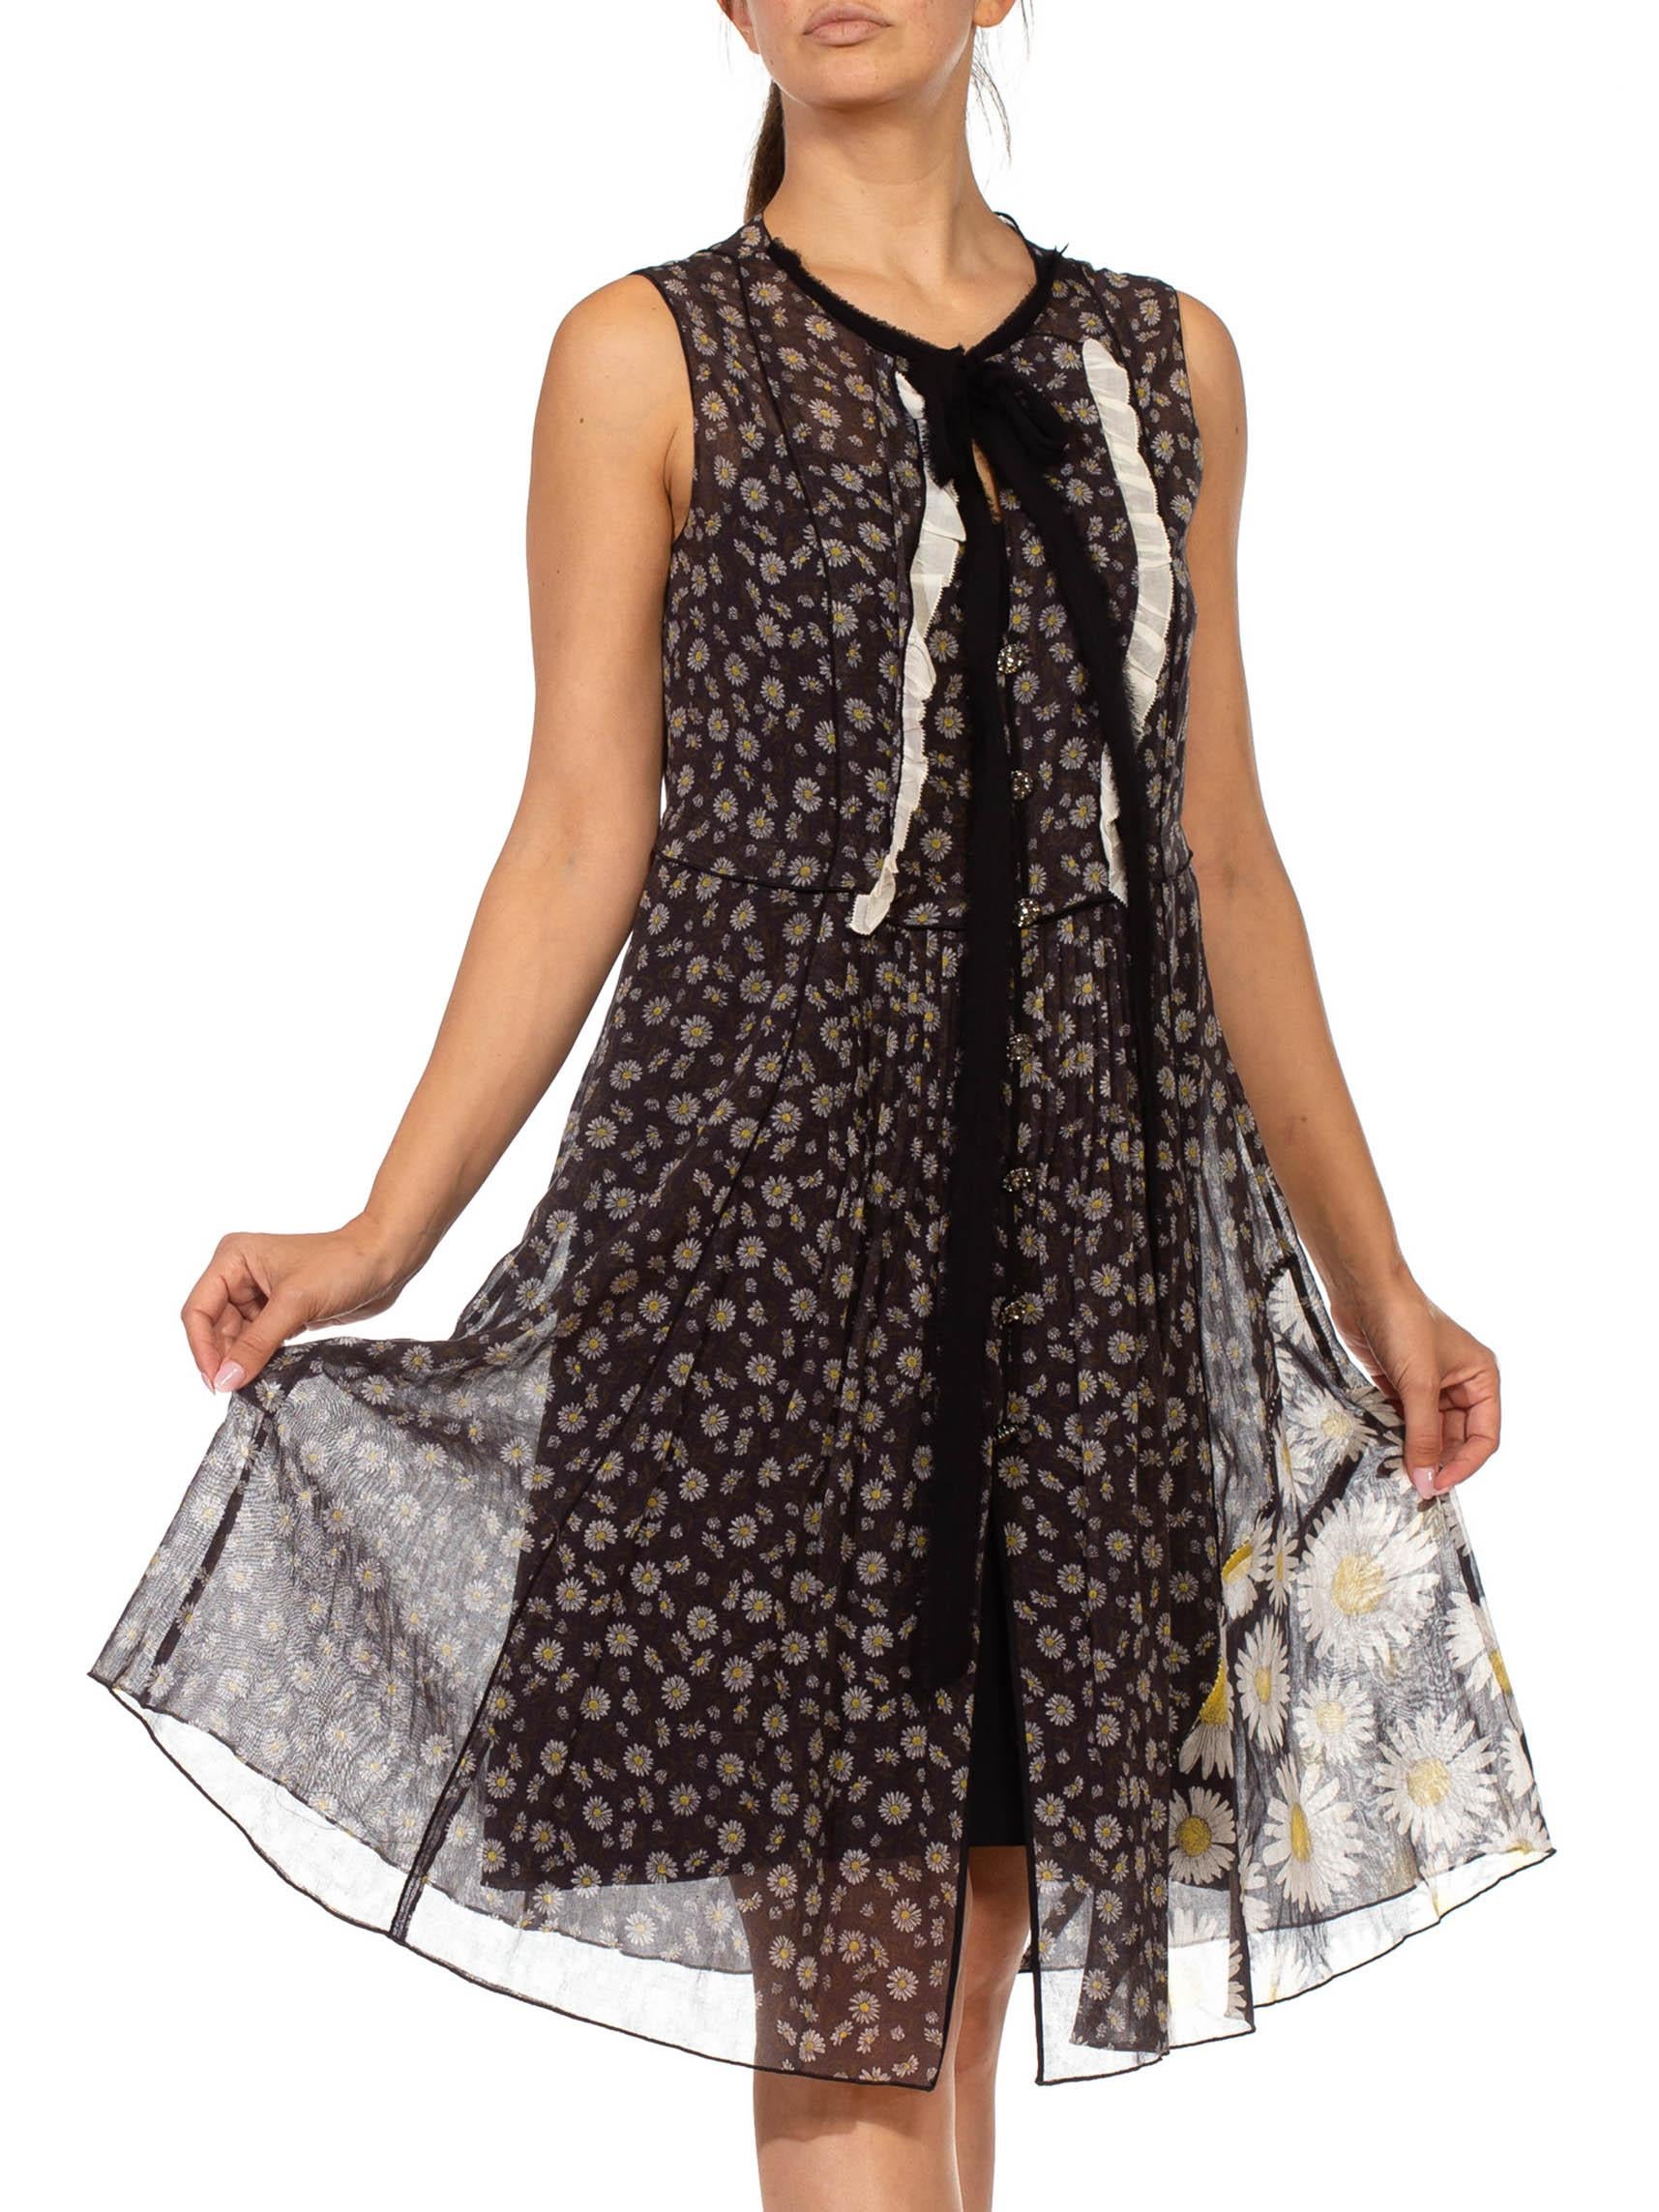 1990S MARC JACOBS Black Daisy Print Cotton Dress With Patchwork And Ruffle Deta For Sale 1